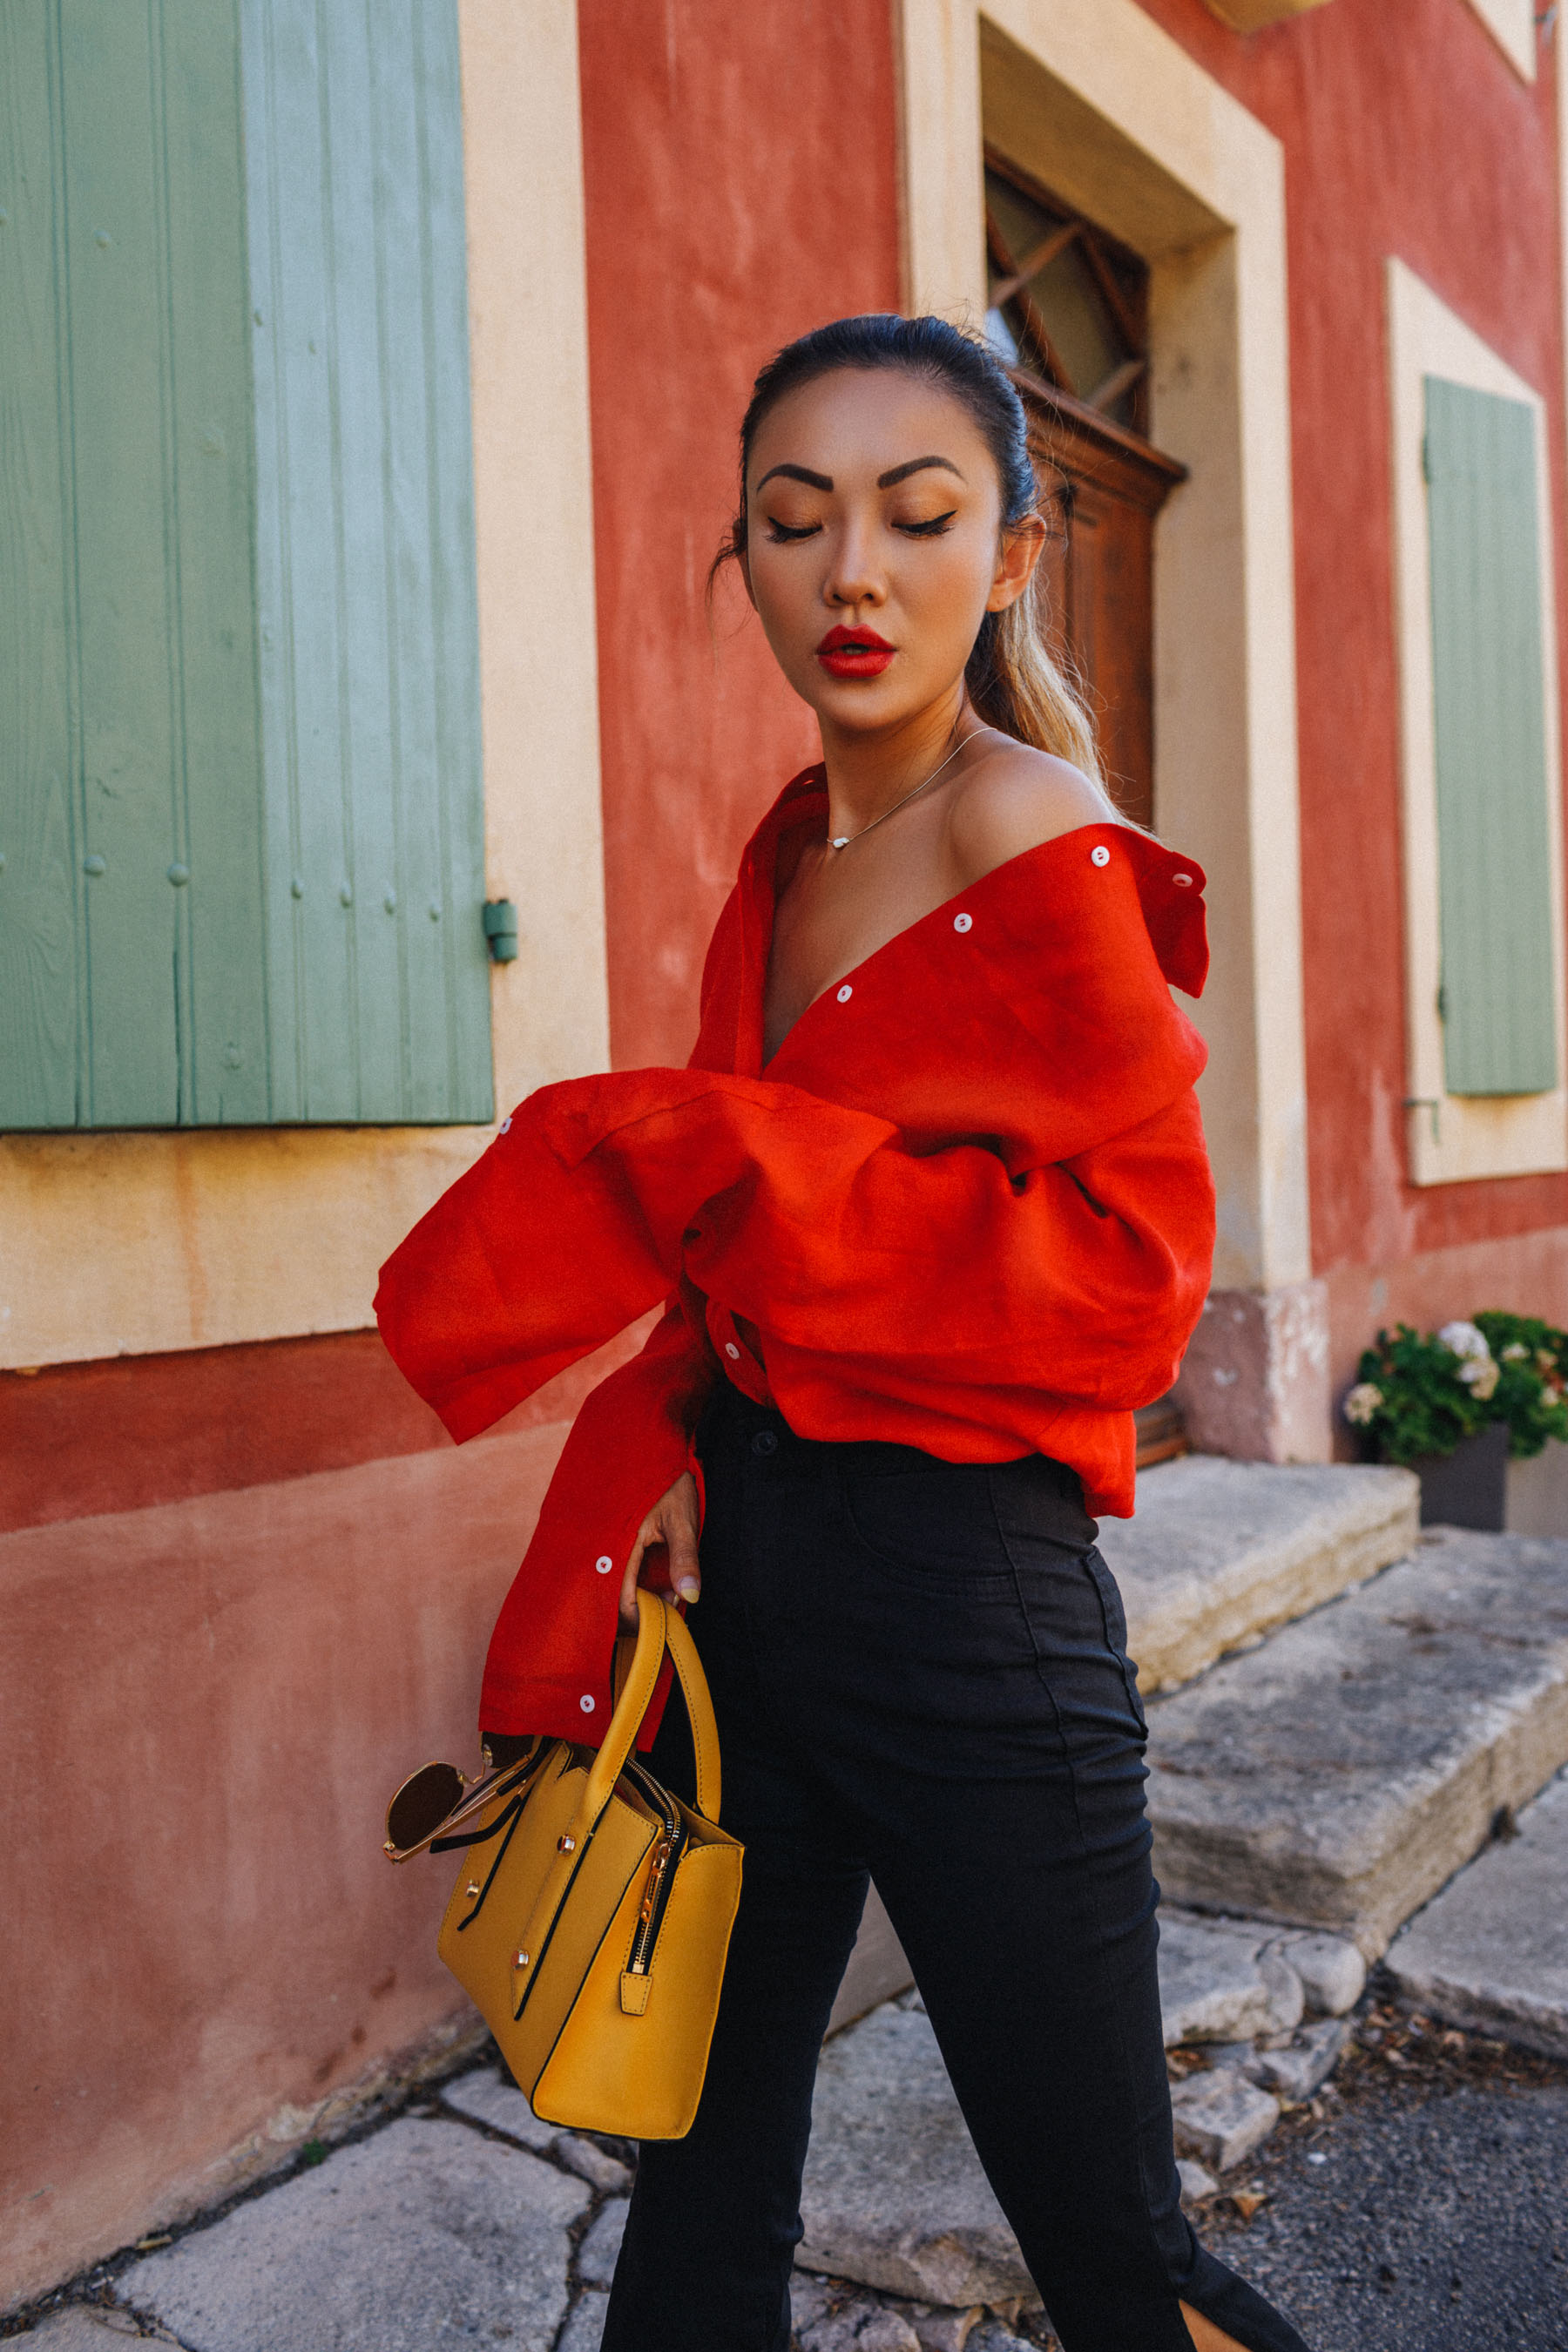 Guide to Wearing Color For Spring - cherry tomato, Bold Red Vintage-Inspired Trend // NotJessFashion.com